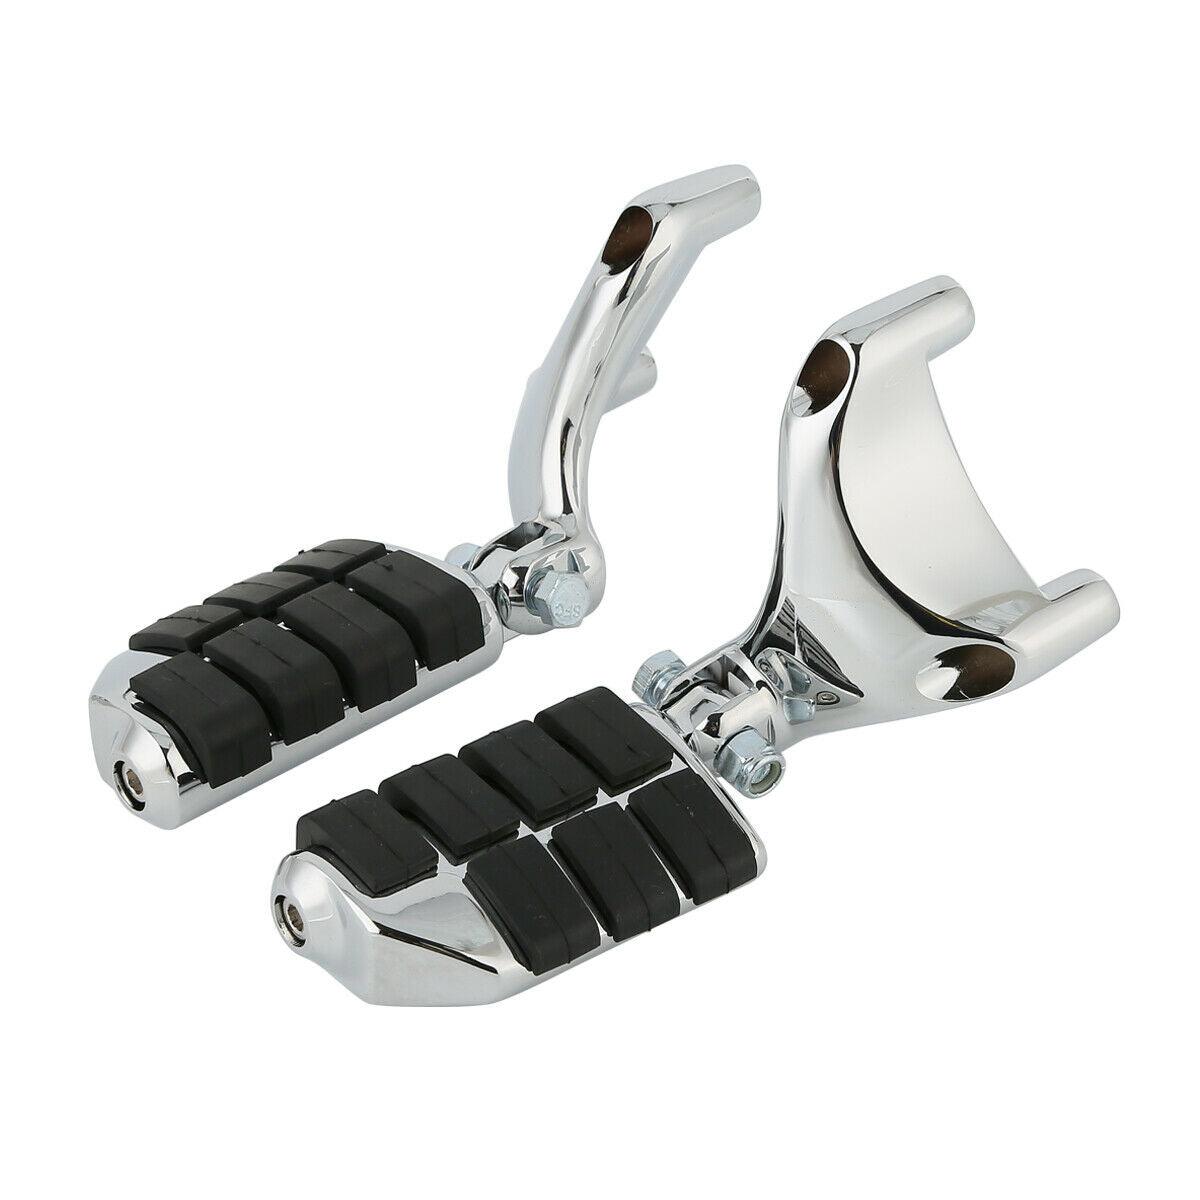 Passenger Foot Pegs Footrest Mount Fit For Harley Sportster XL883 XL1200N 04-13 - Moto Life Products